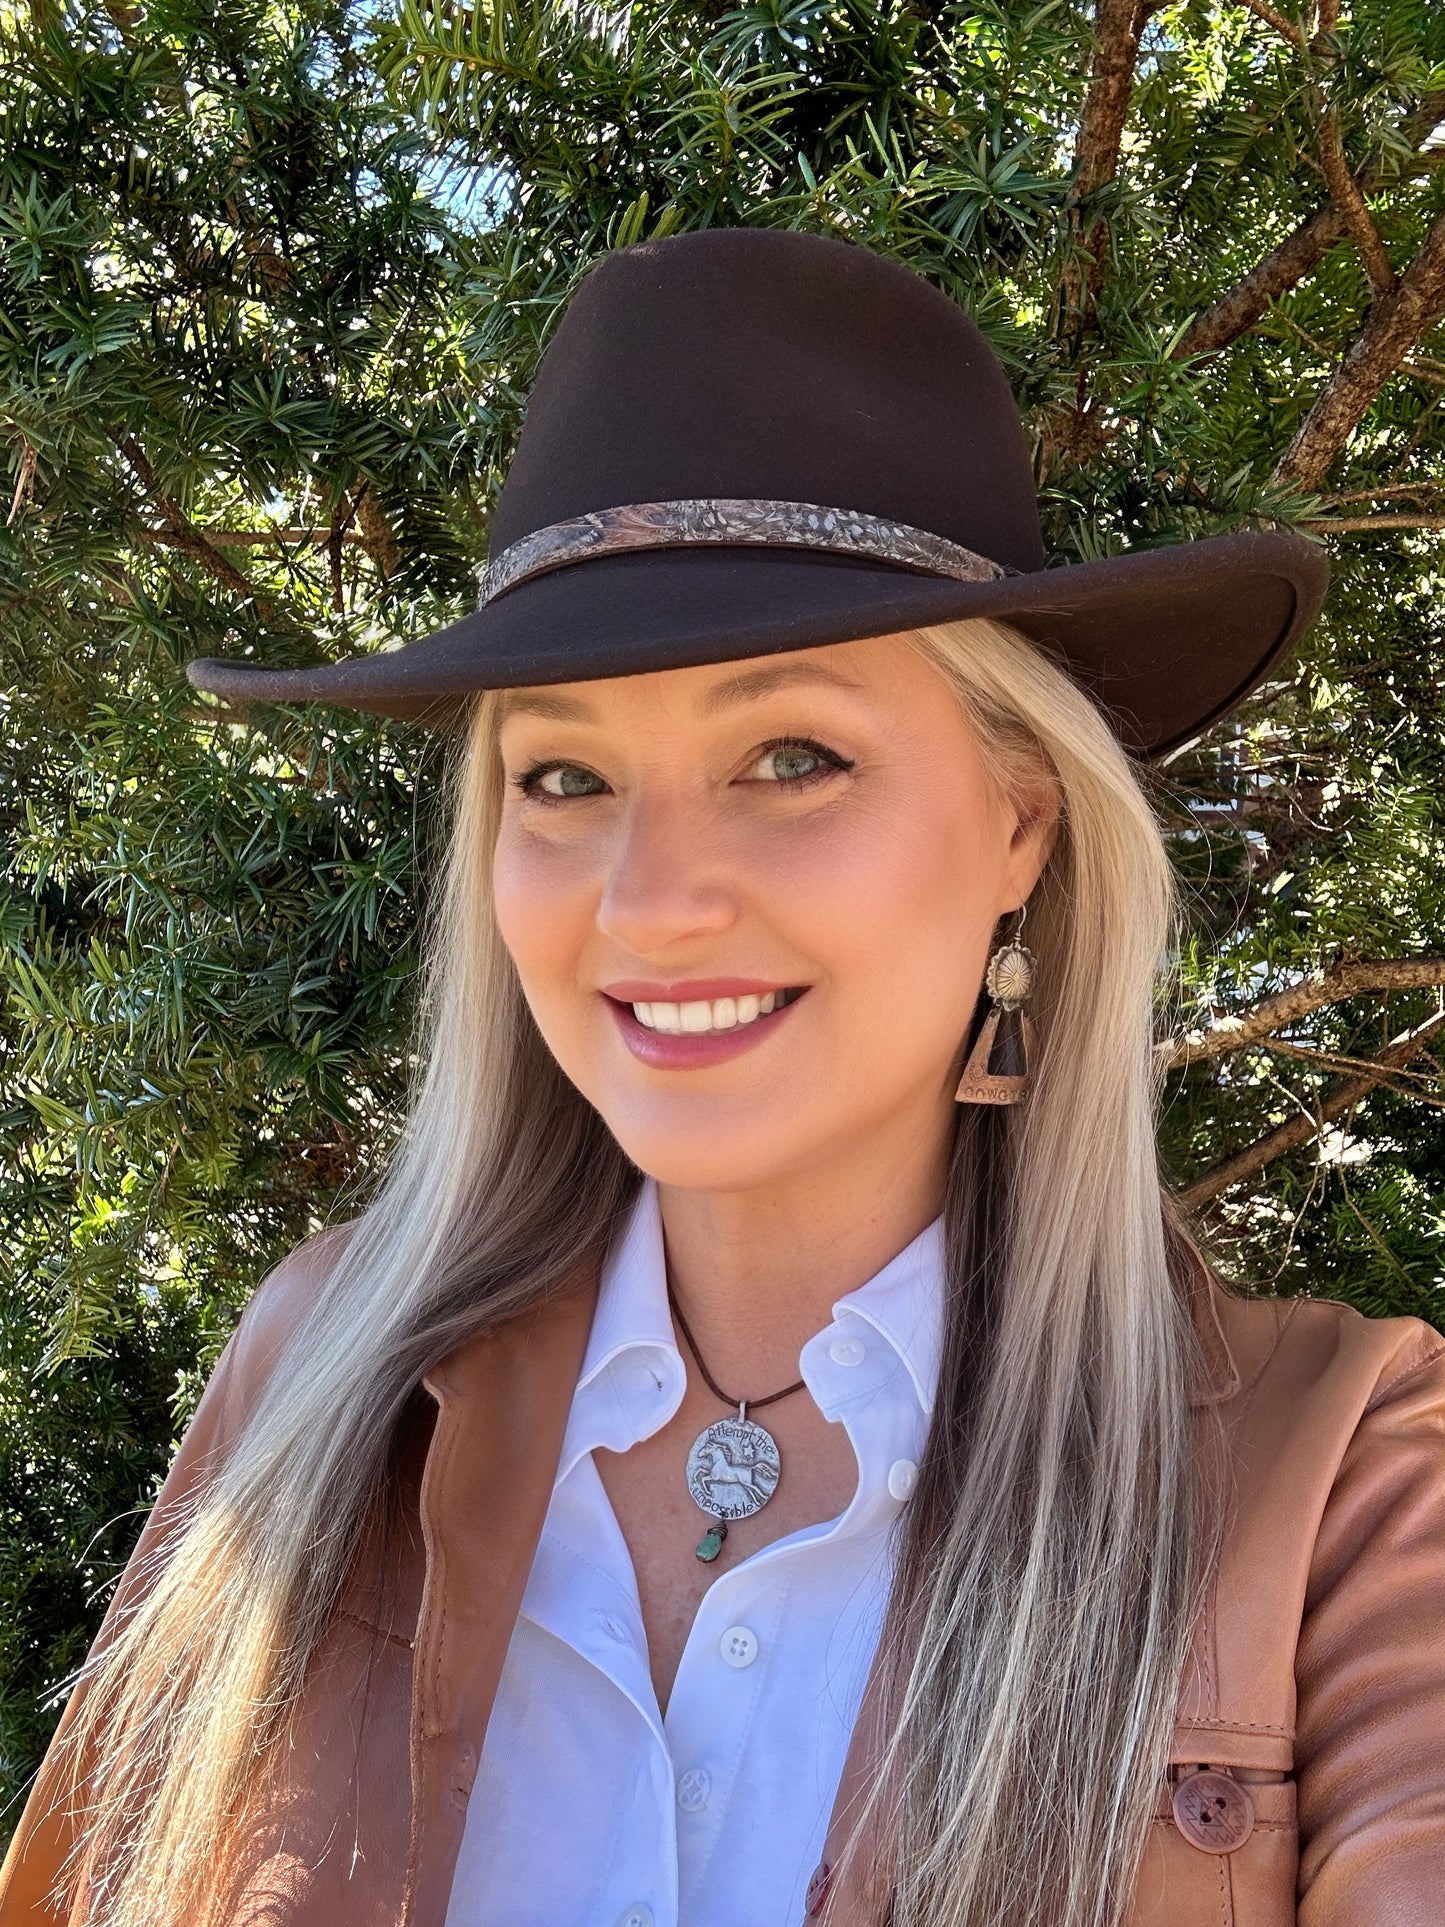 Attempt the Impossible Necklace - Exclusive Handmade Jewelry for Bourbon Cowgirl